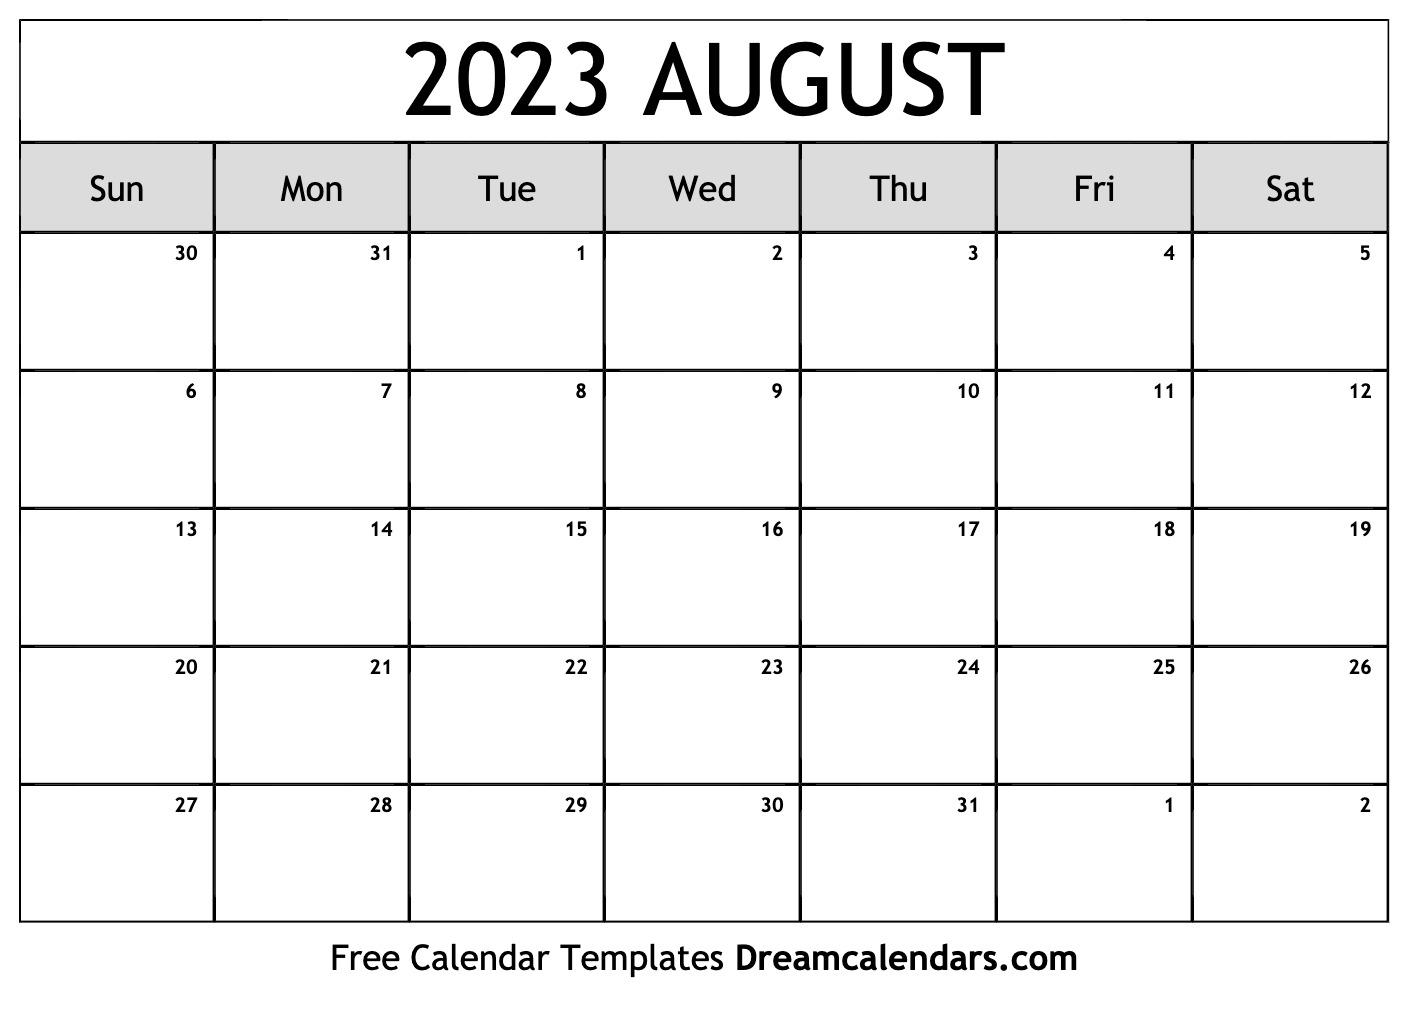 august-2023-calendar-of-the-month-free-printable-august-calendar-of-august-2023-printable